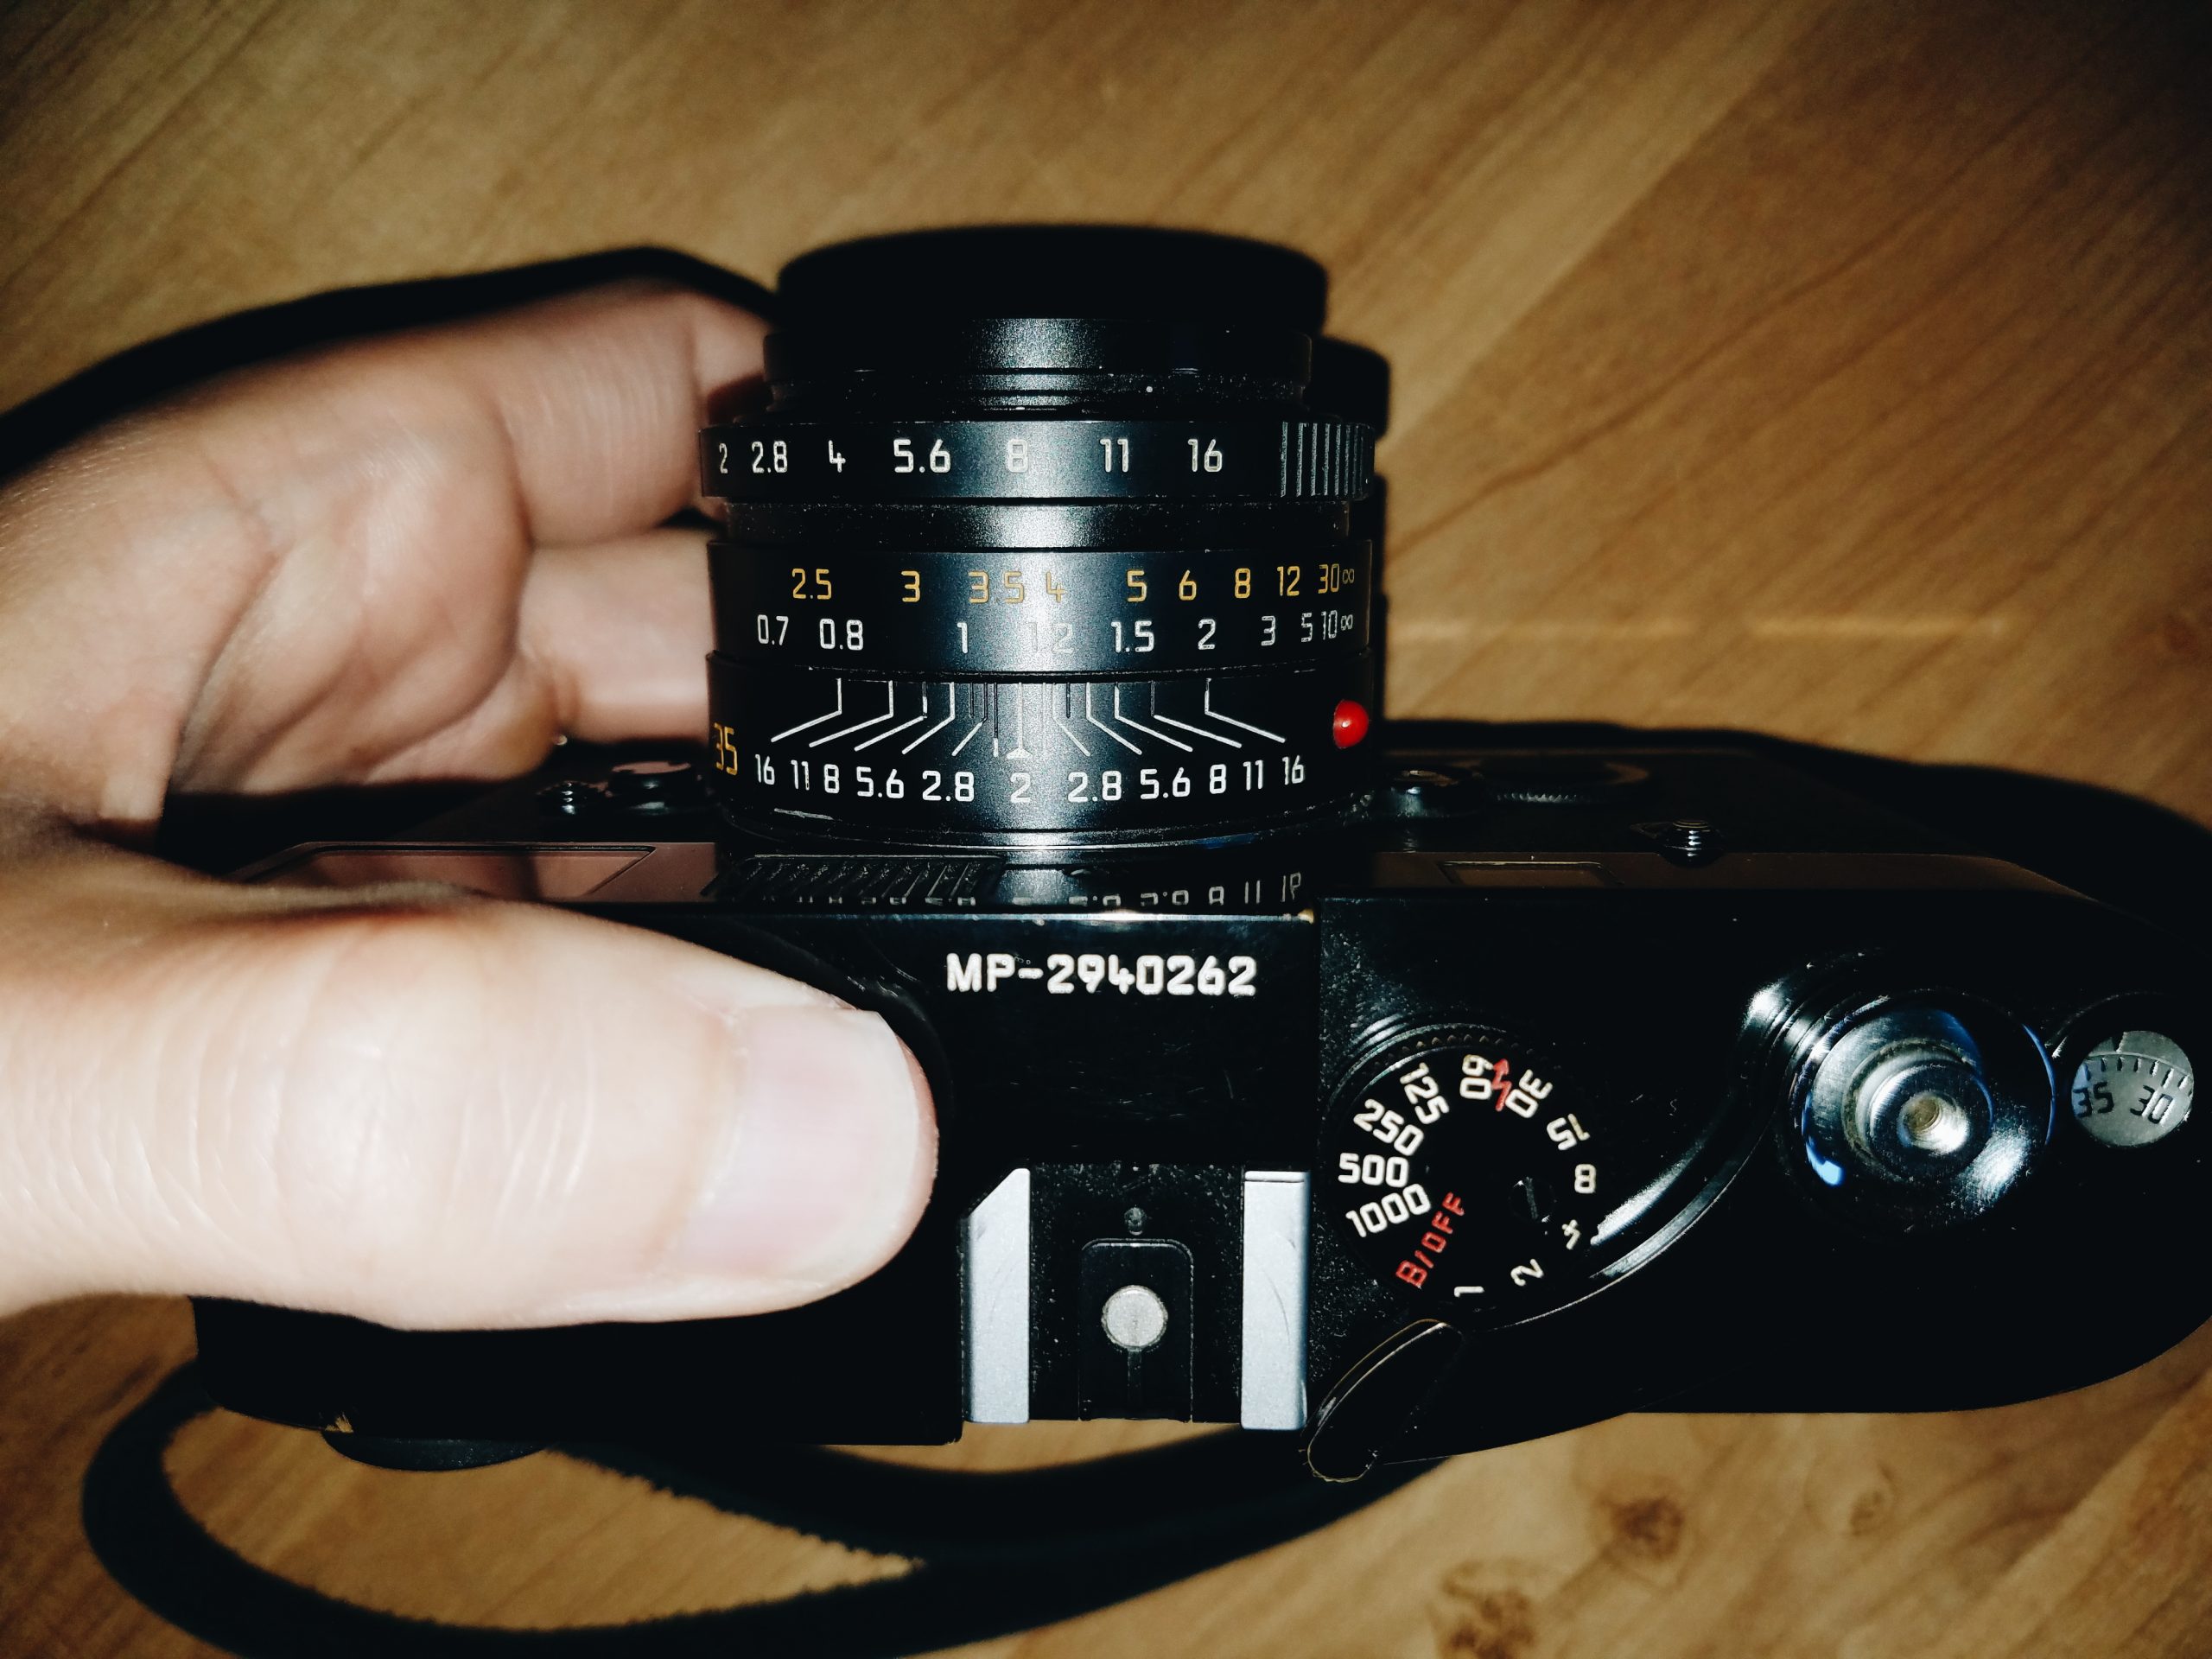 How to Master Shooting Street Photography on a Leica or Rangefinder